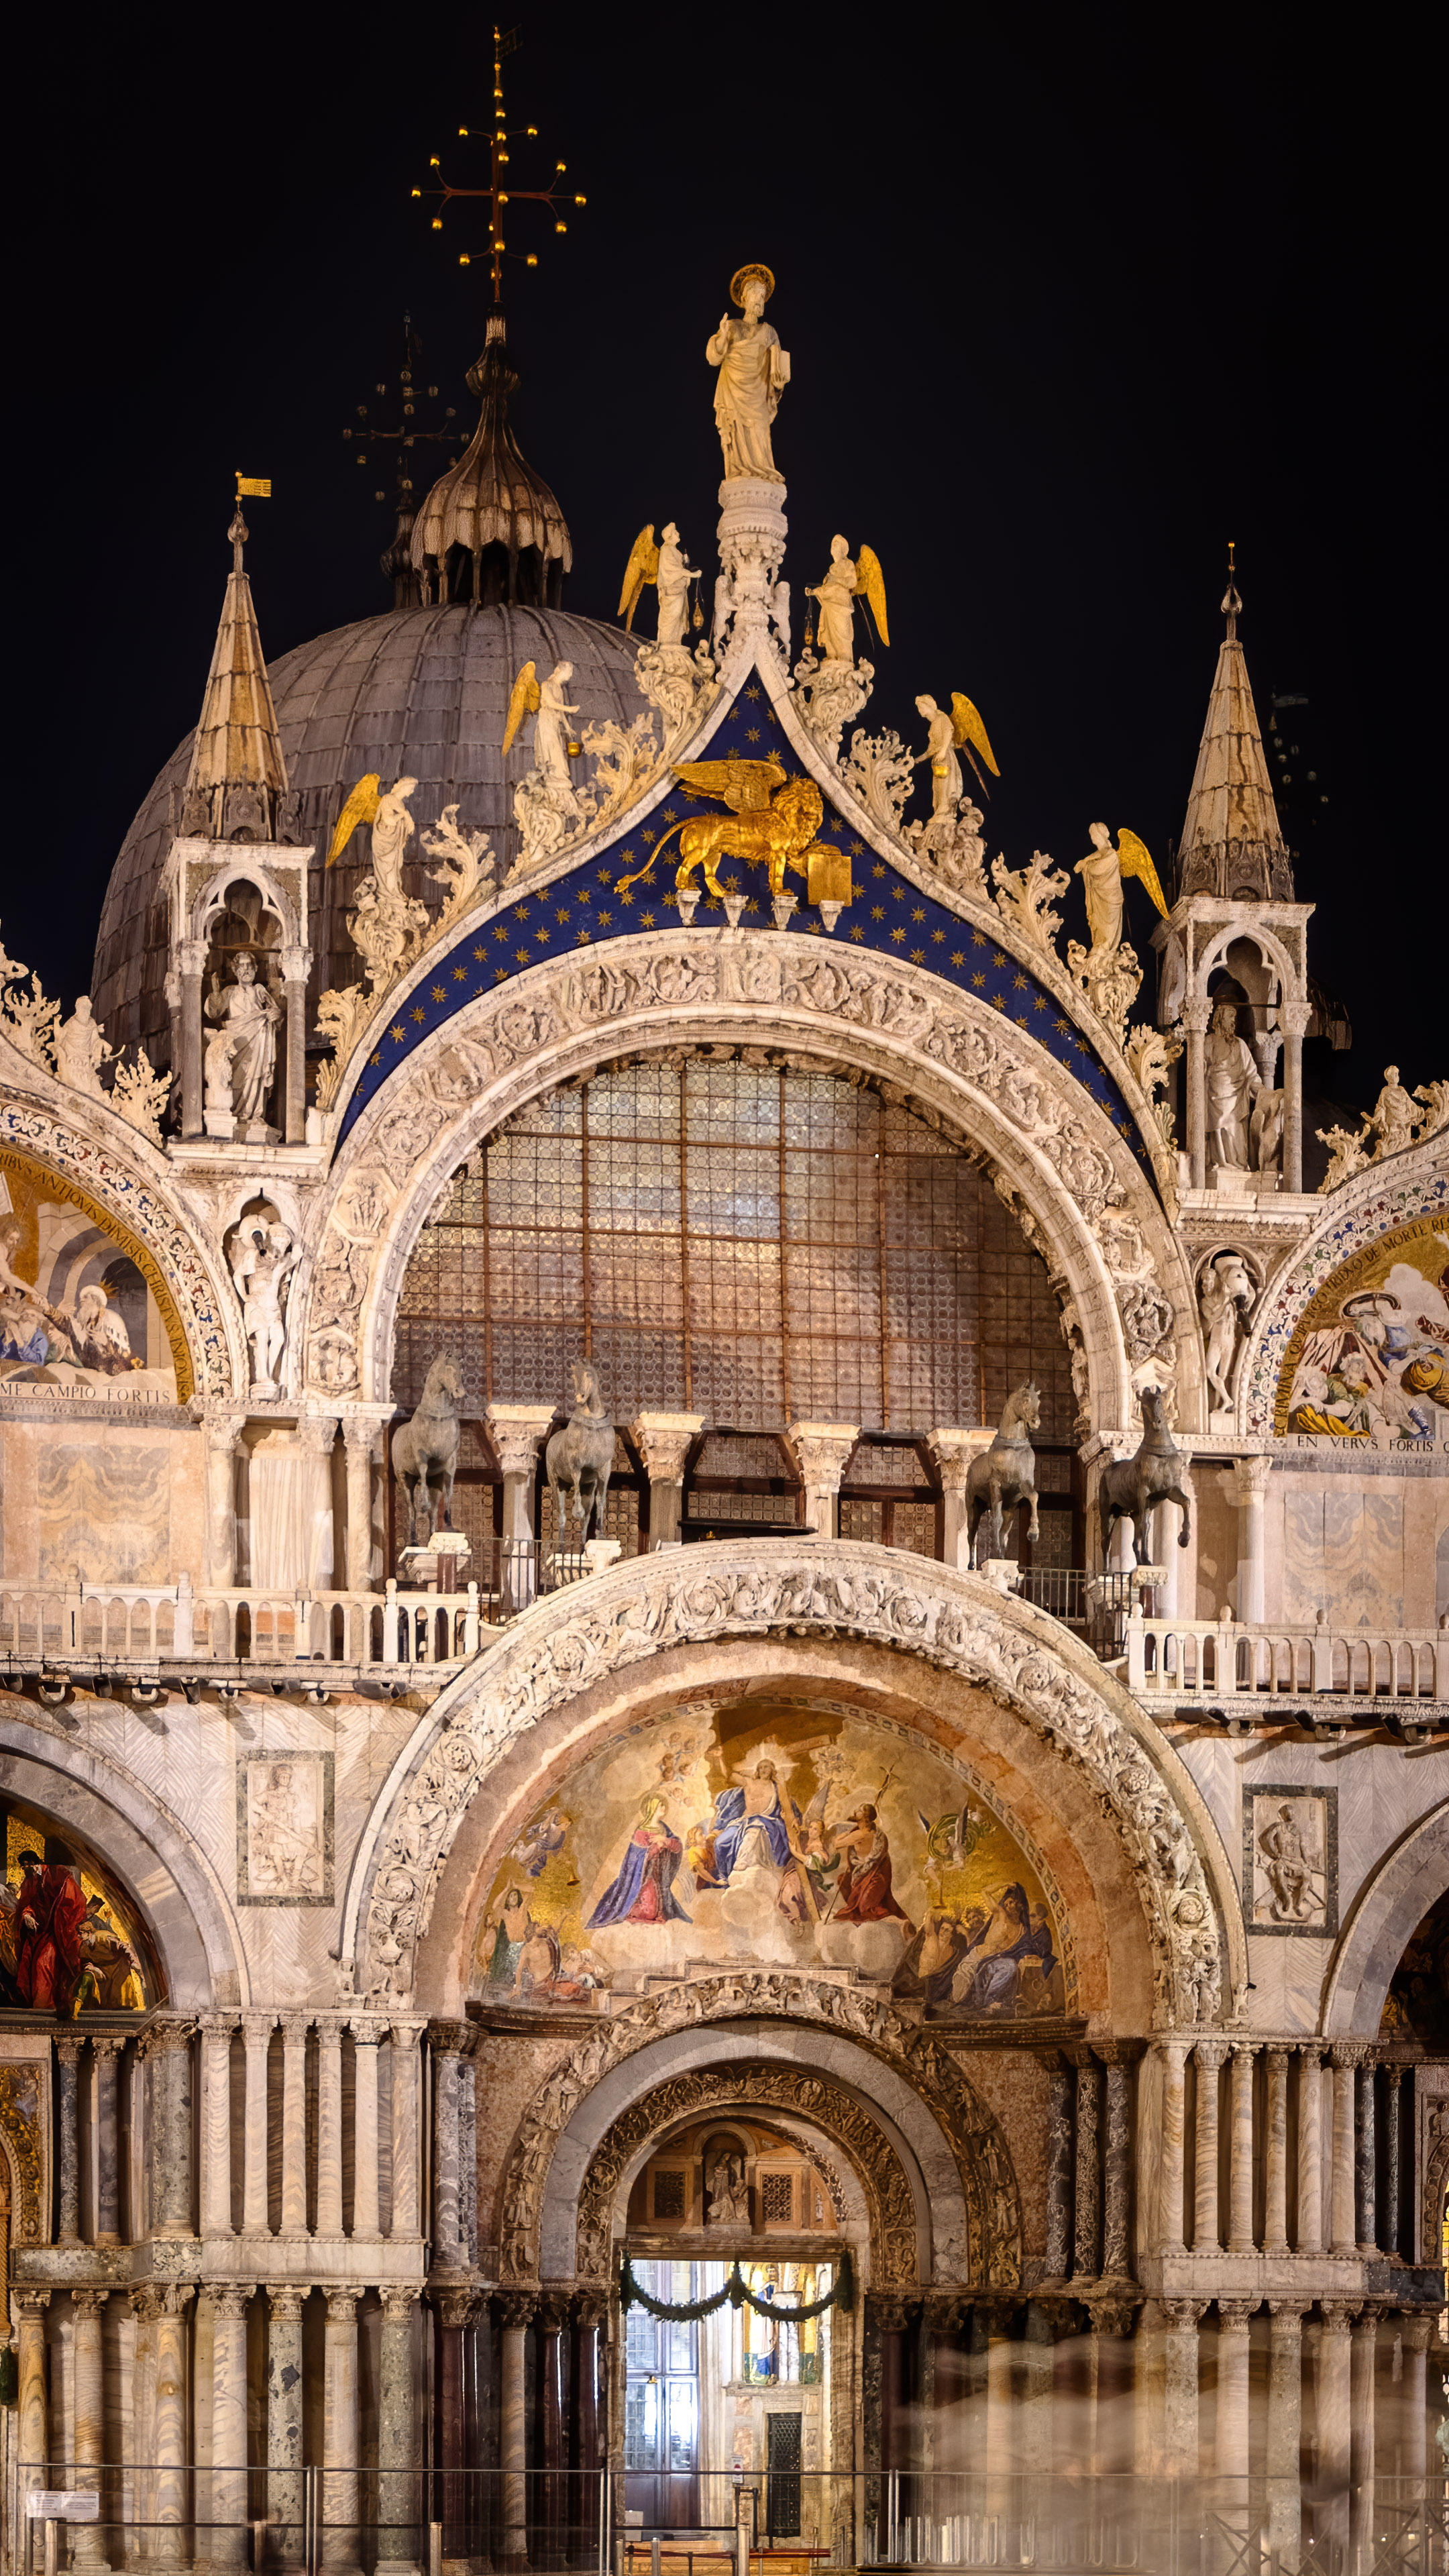 dmire the beauty of Venice's St Mark's Basilica under the moonlight with this captivating wallpaper. A great addition to your collection.